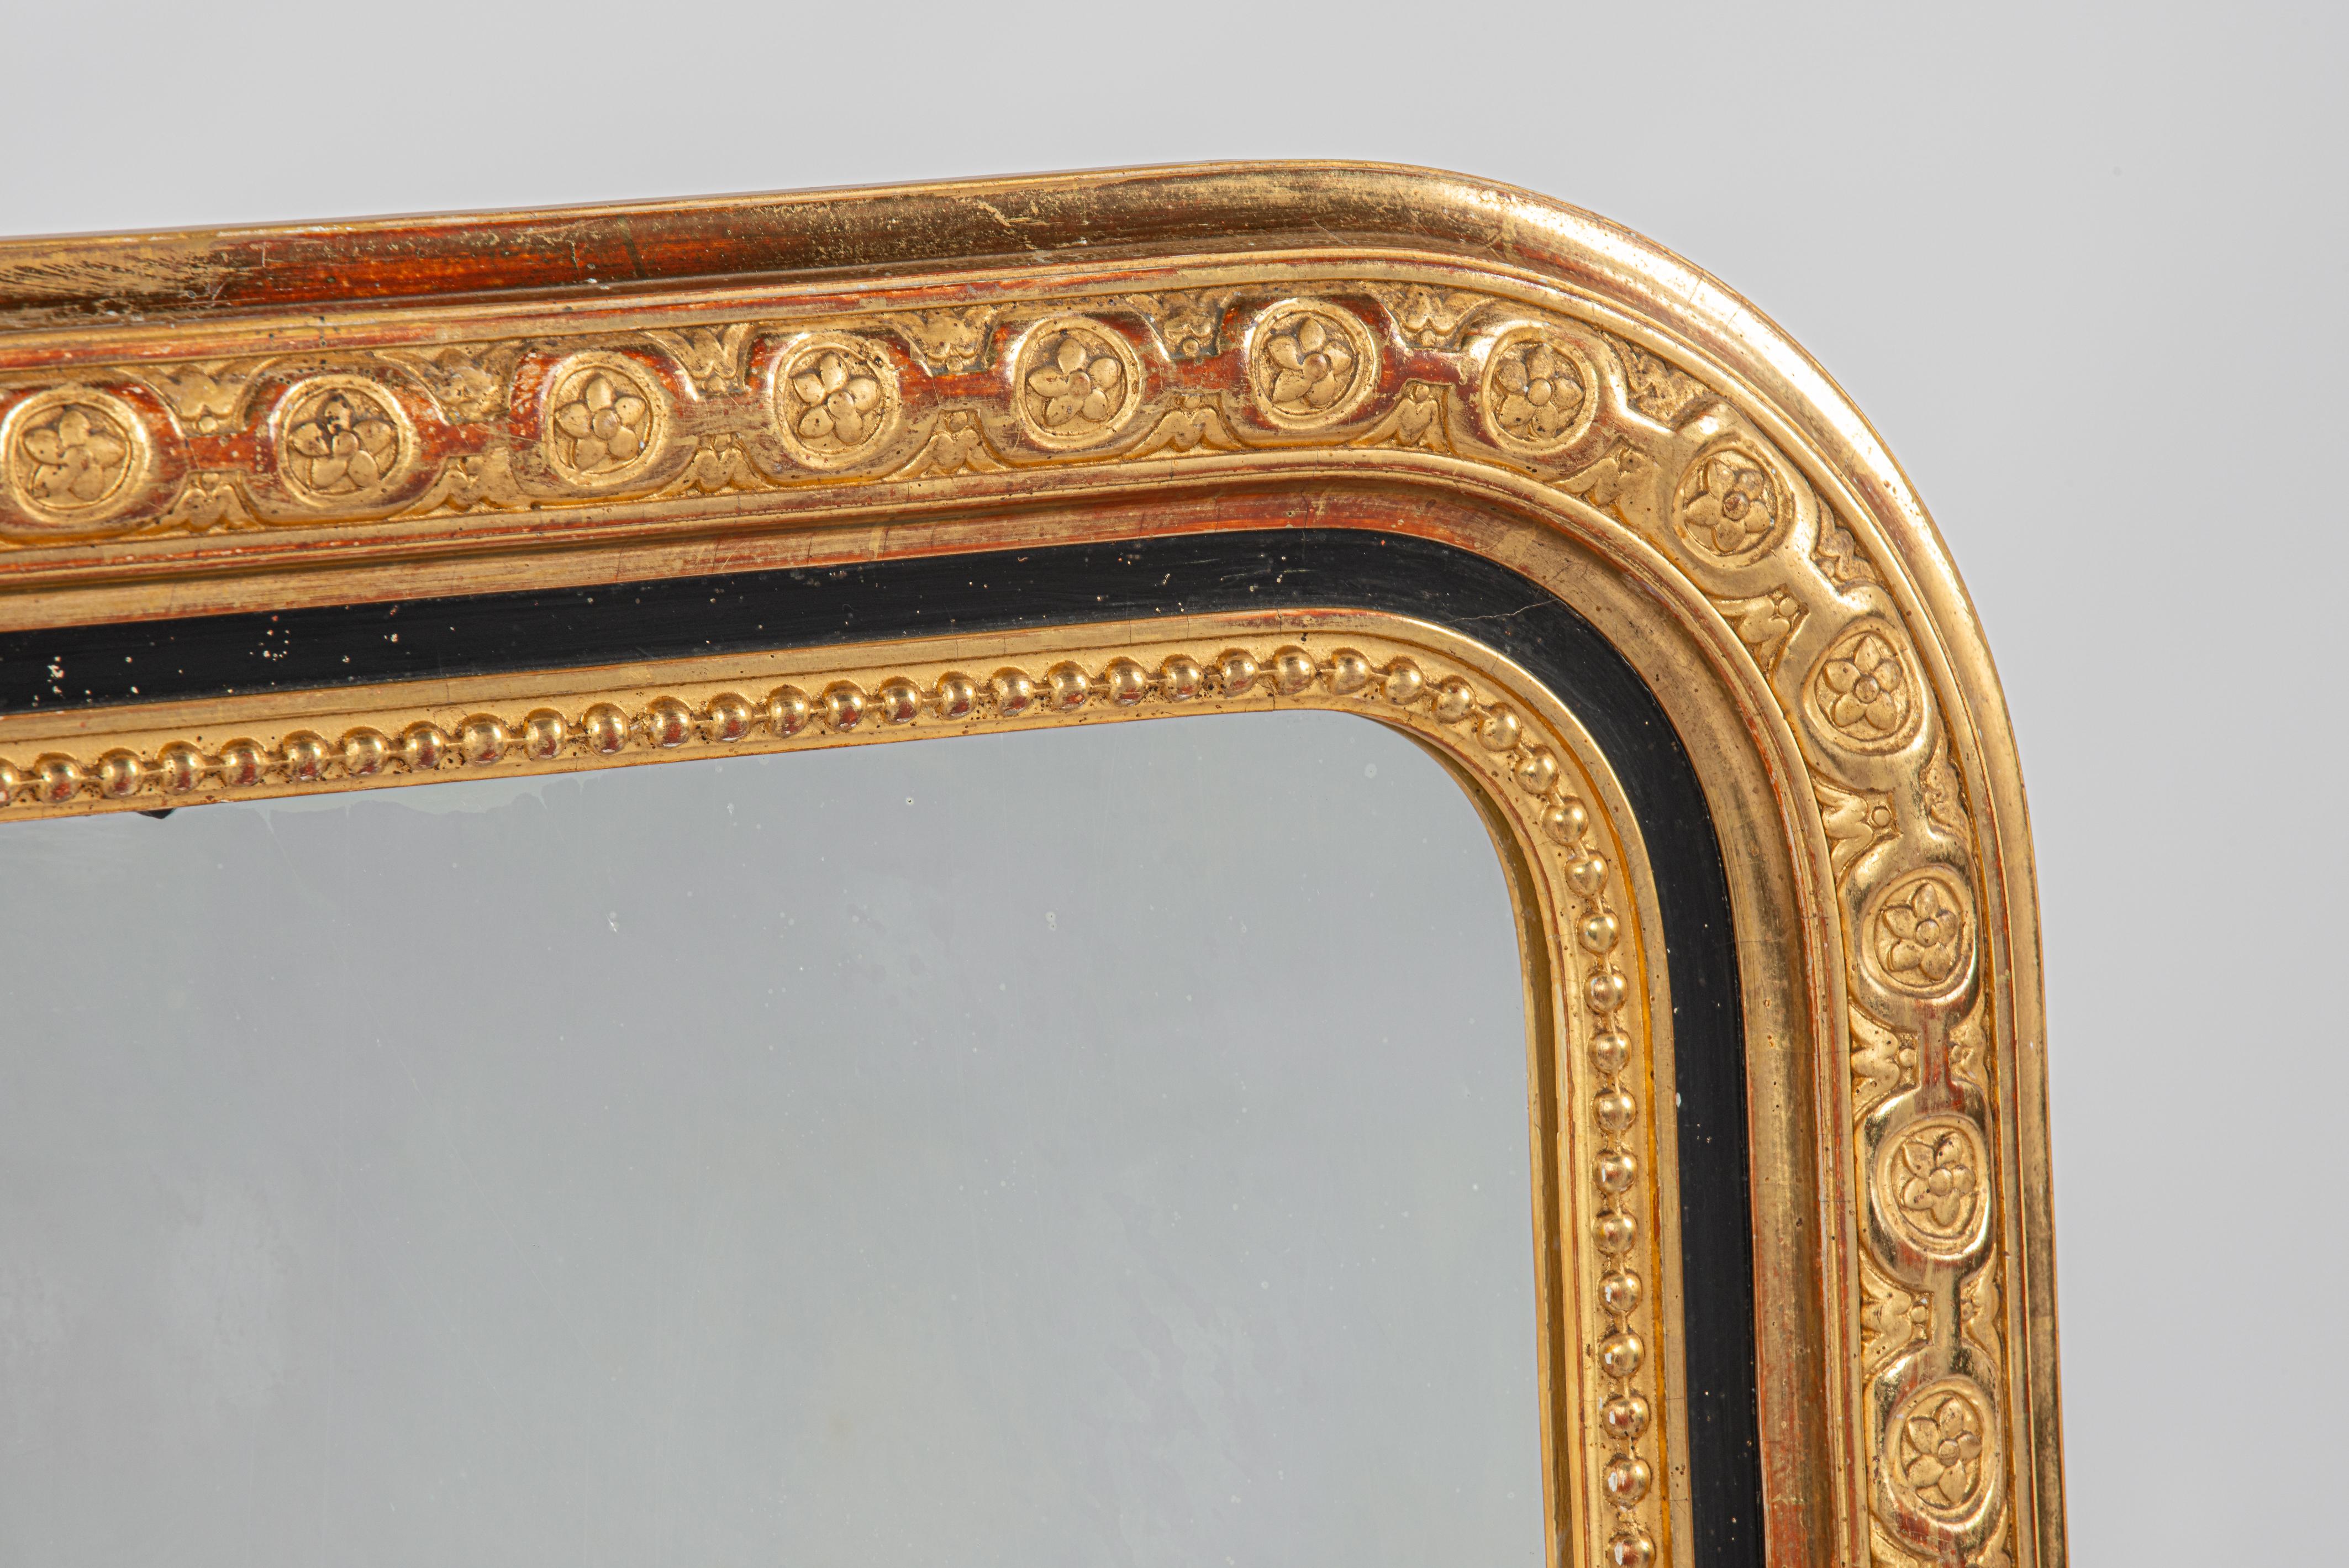 On offer here is a beautiful antique gold leaf-gilded Louis Philippe mirror from southern France. This mirror dates back to around 1870 and features rounded upper corners characteristic of the Louis Philippe style. Crafted in the south of France, it